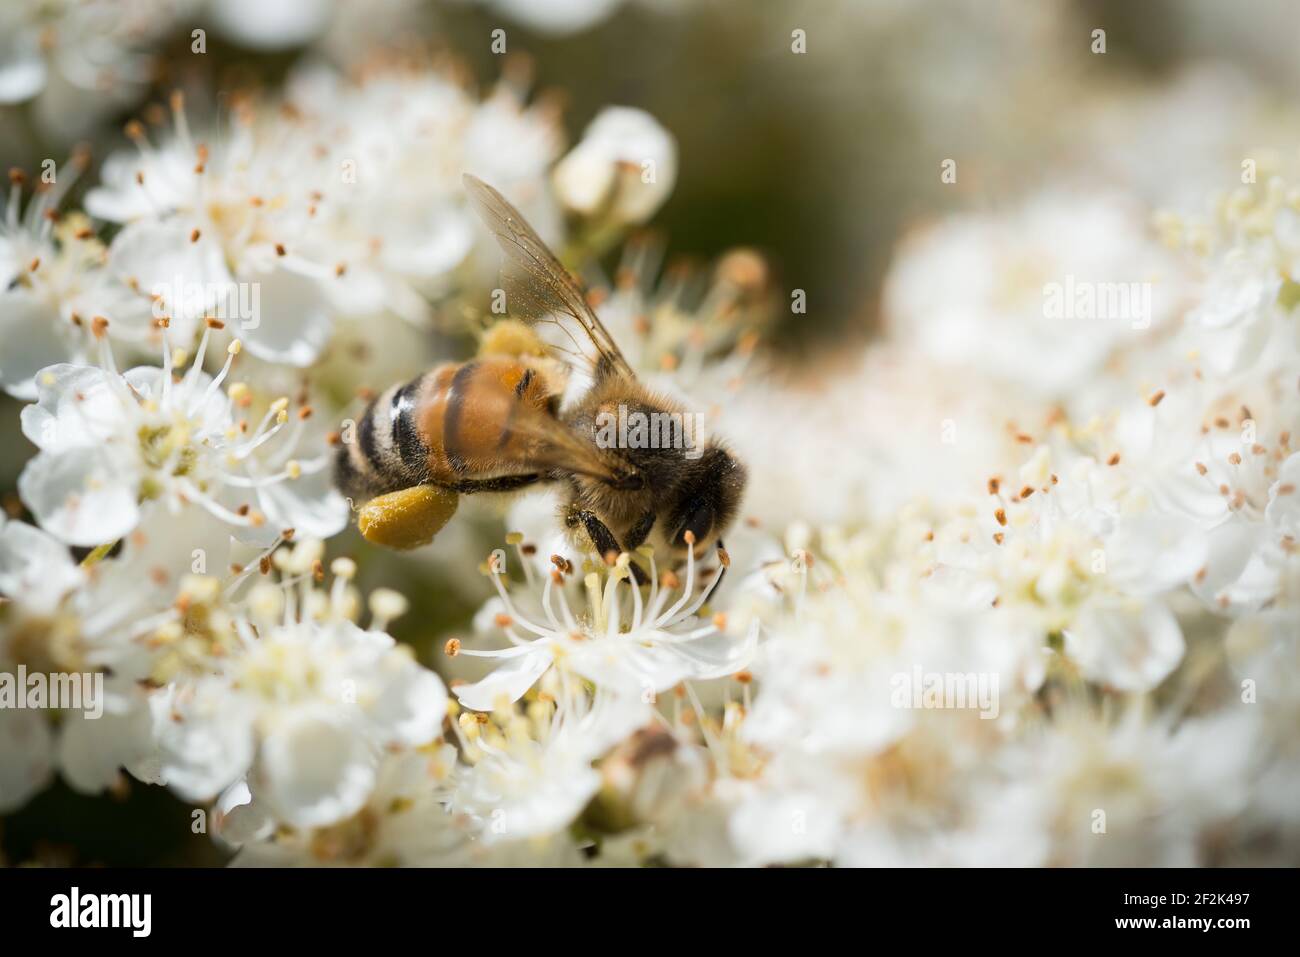 A western honey bee or European honey bee (Apis mellifera) foraging for nectar in the flowers of a blossoming firethorn or pyrocanthus. Stock Photo